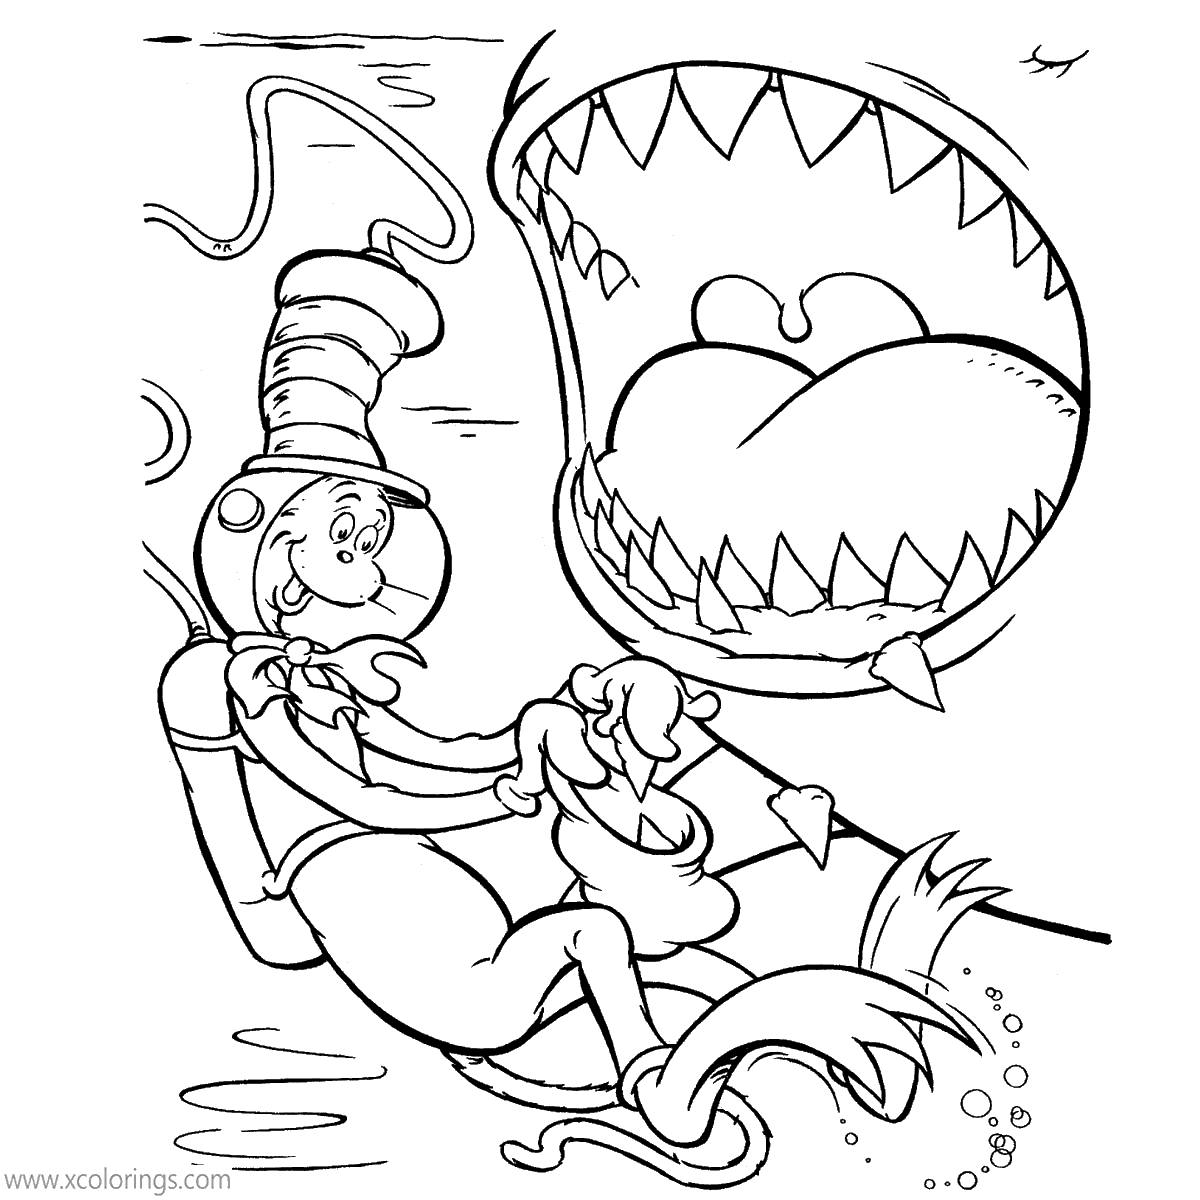 Free Cat In The Hat Coloring Pages Teeth of the Shark printable